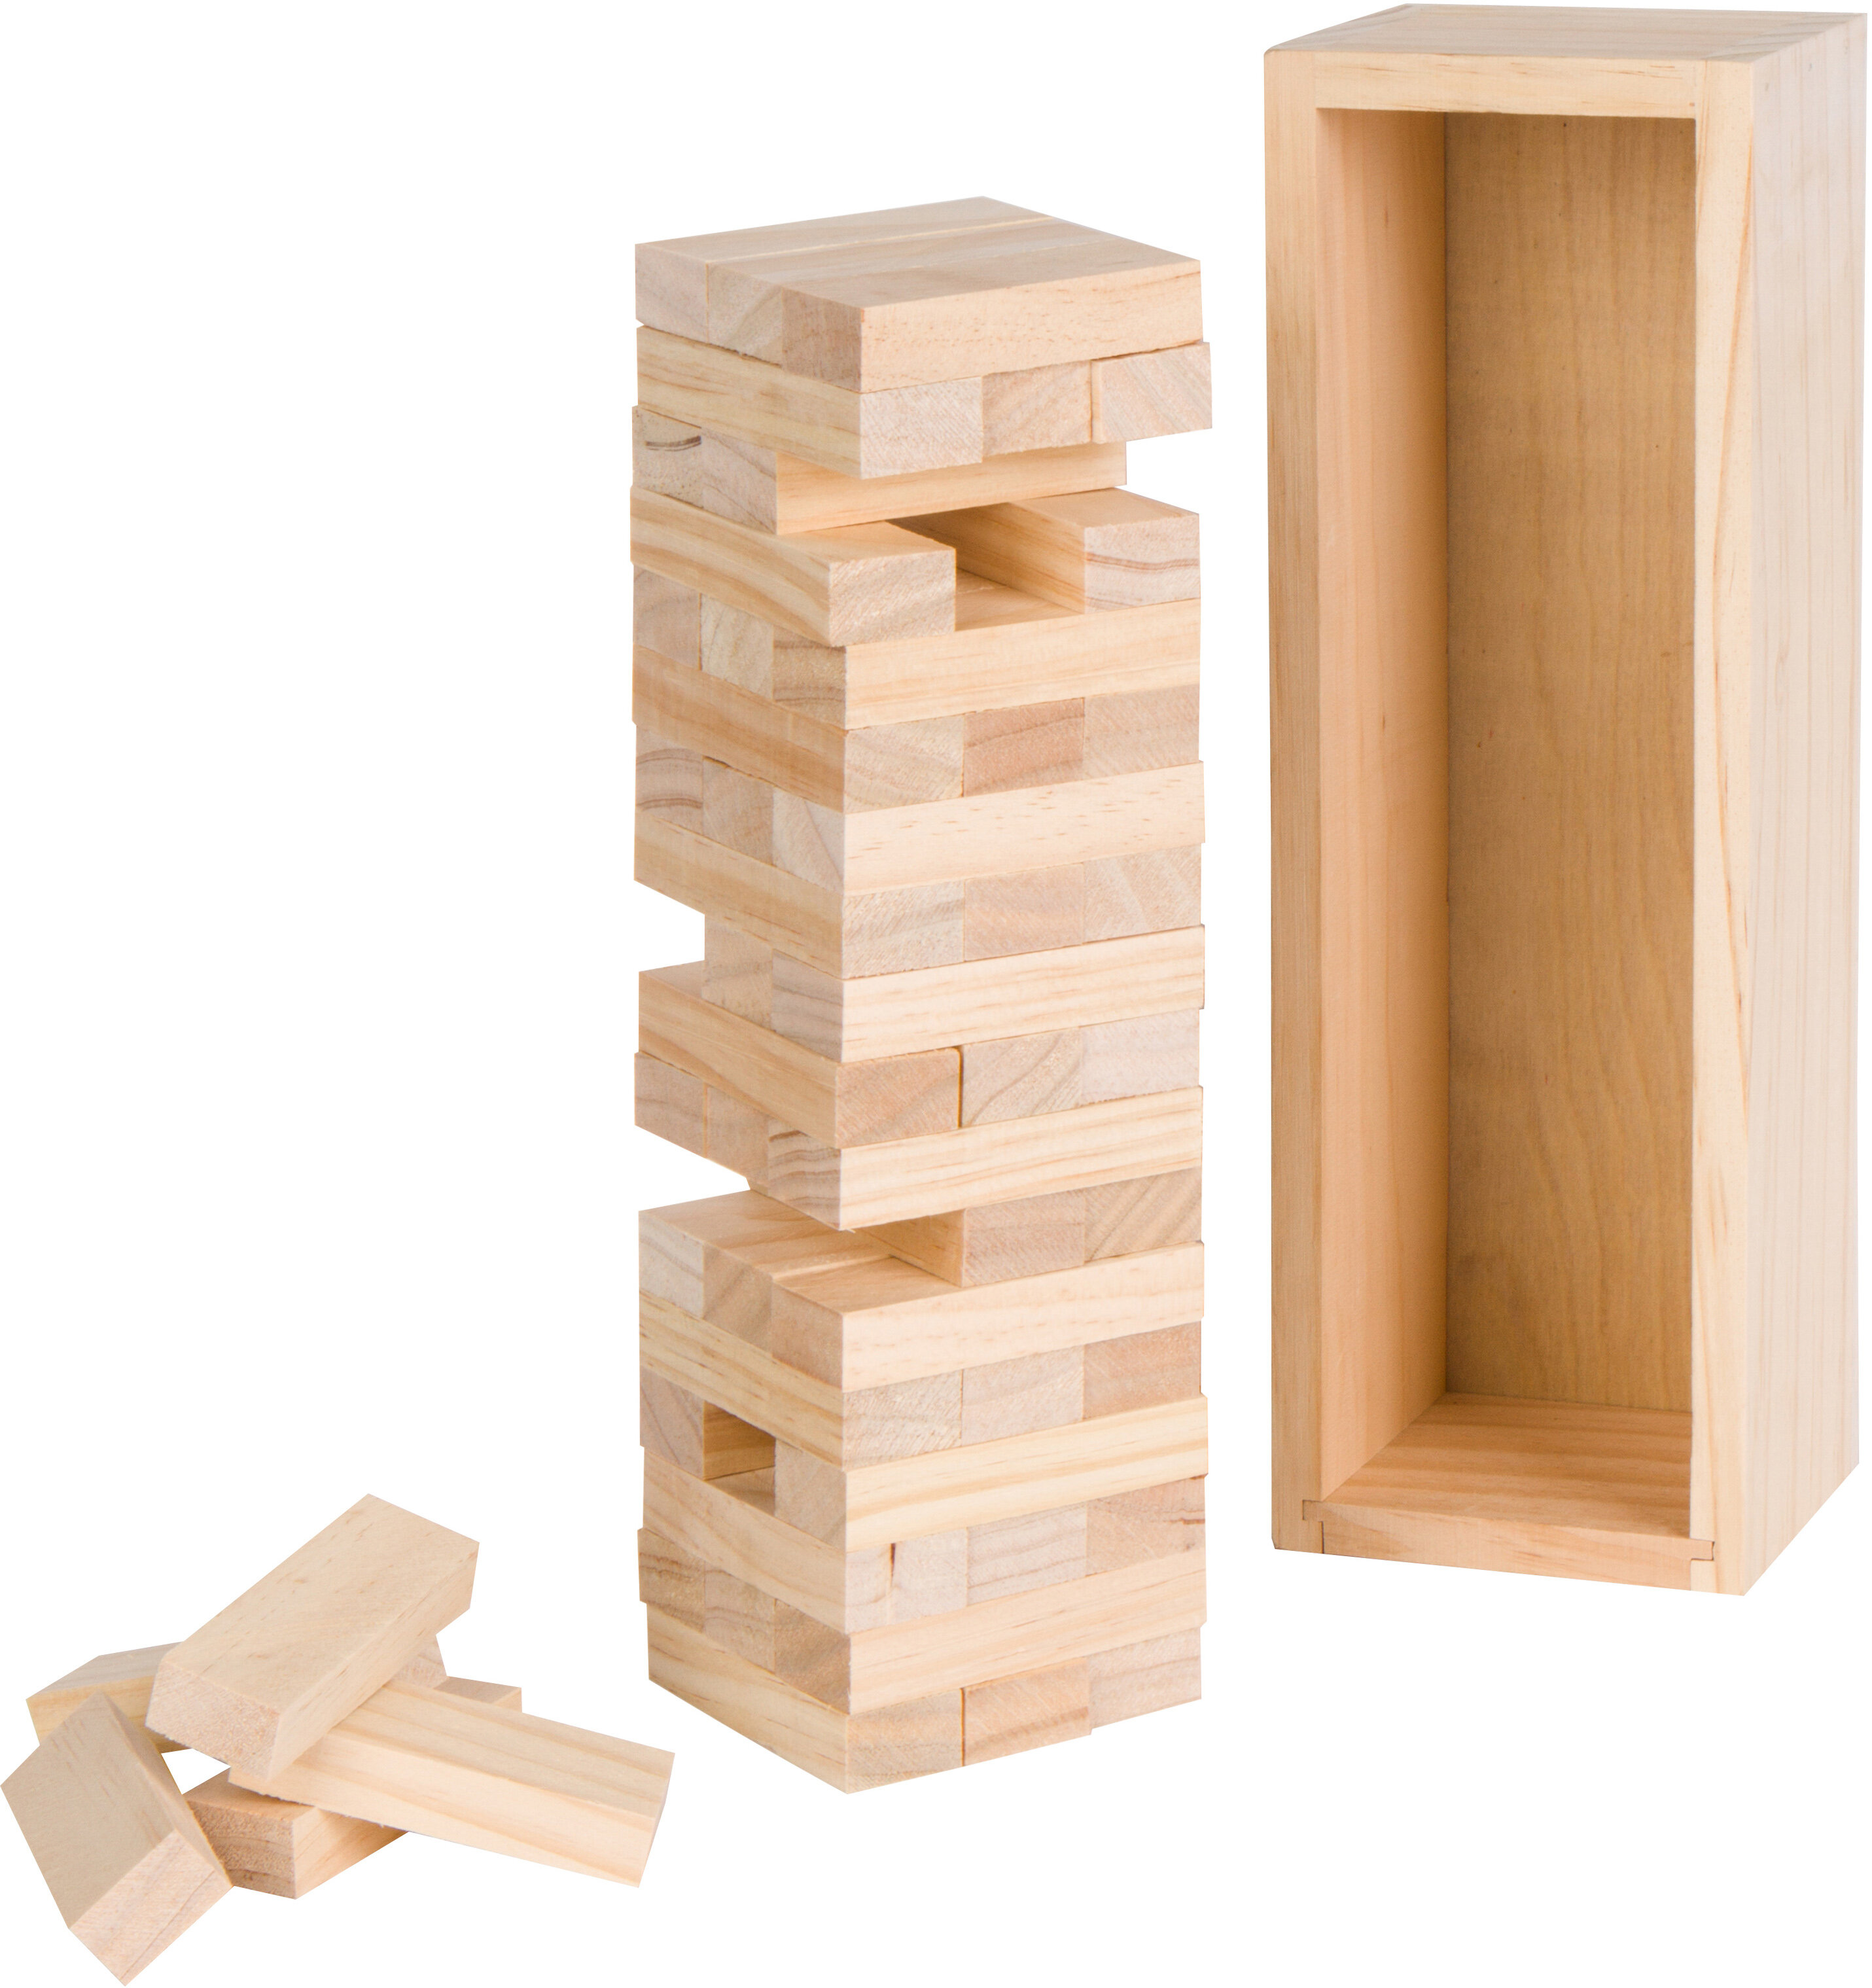 Hape Limited Edition Solid Beech Wood Stacking Blocks Carrying Sack-New Open Box 